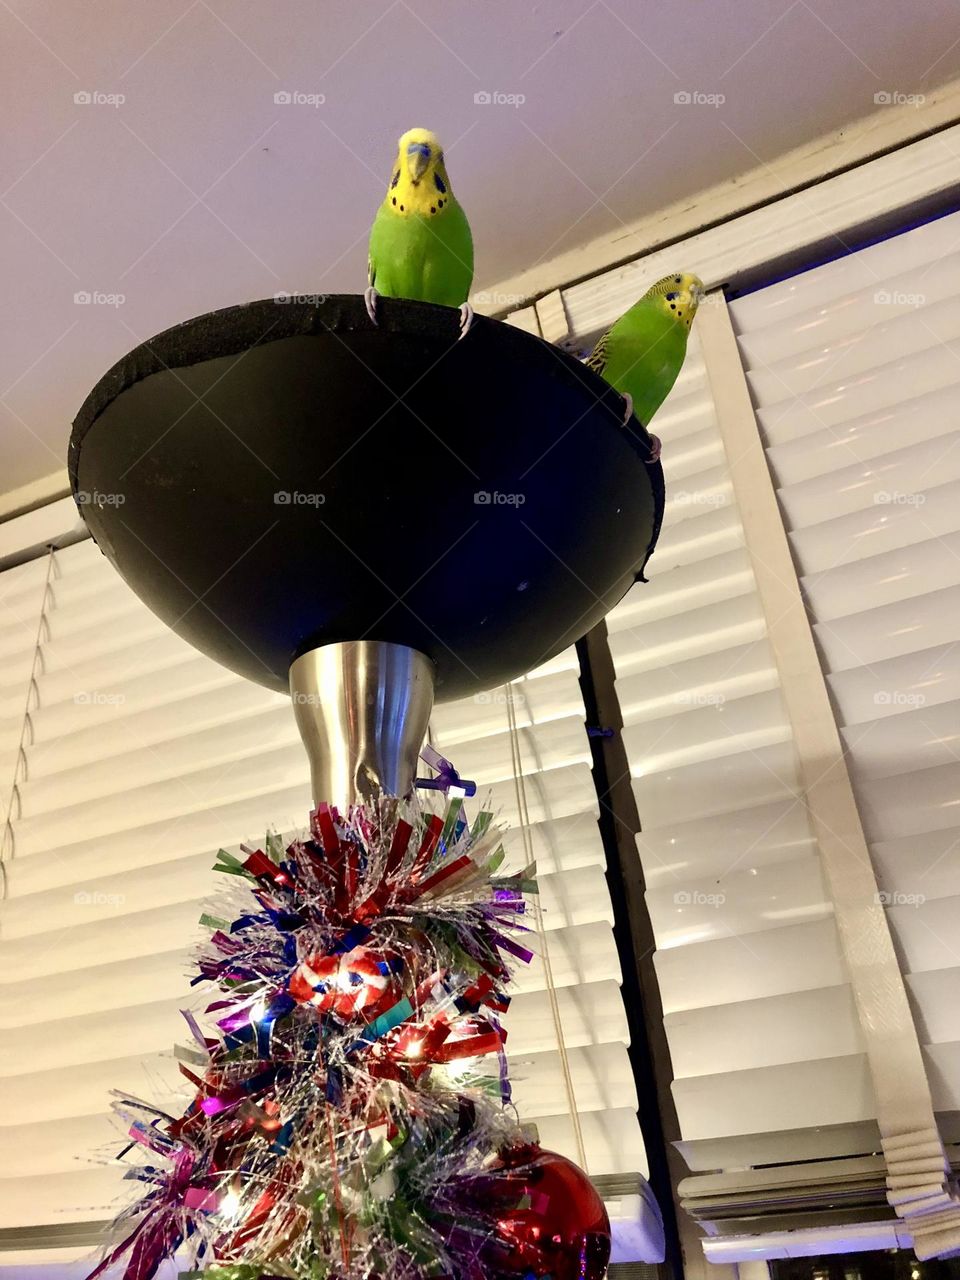 Kiwi & Coco on top of the lamp / looking cute together❤️ 🦜 🦜